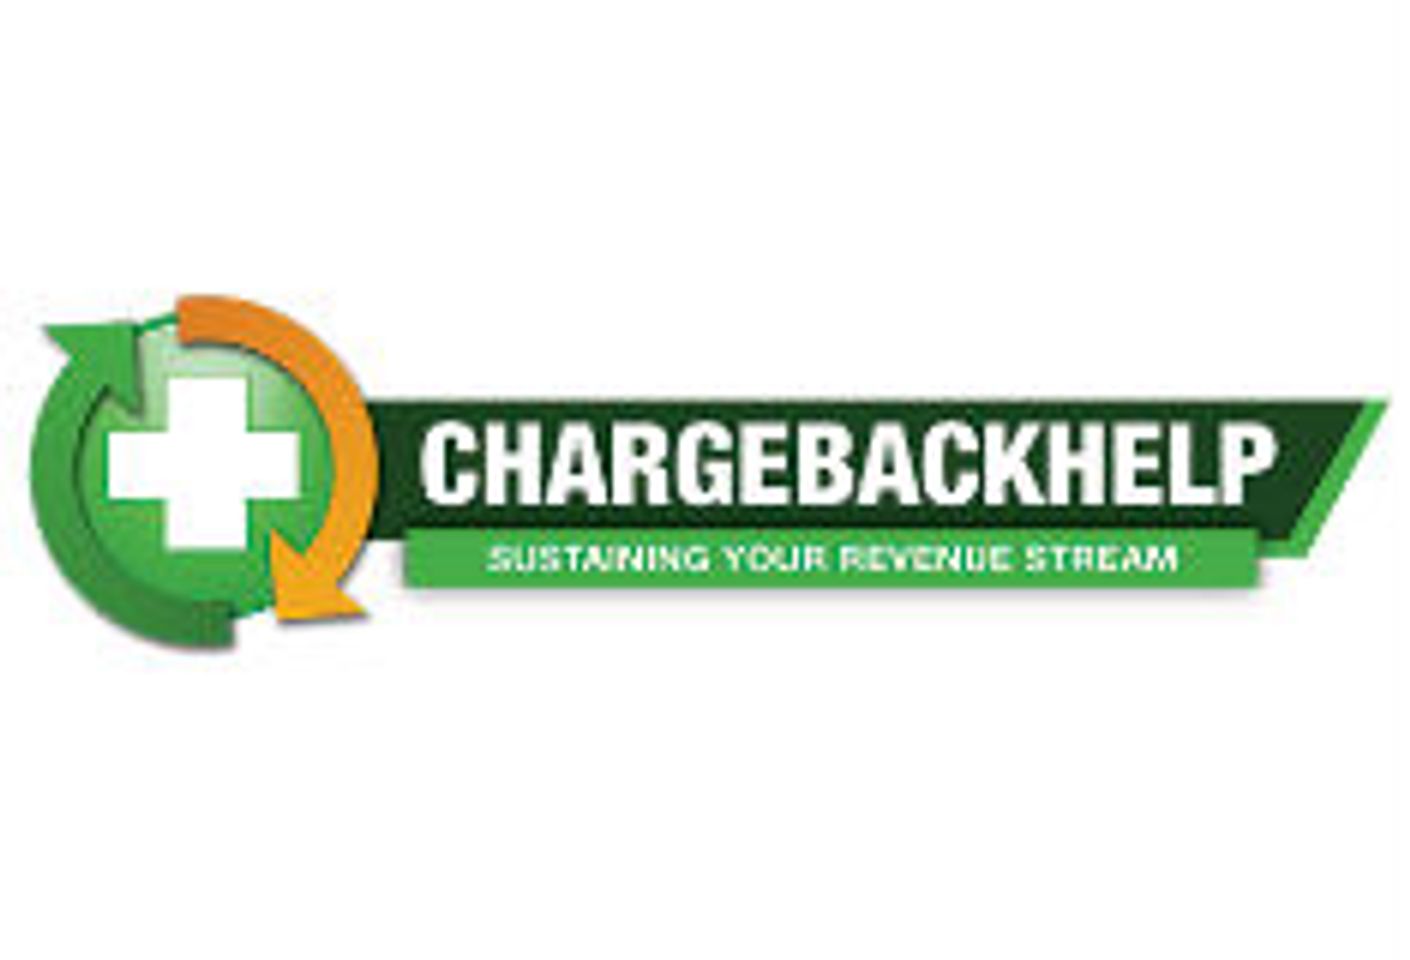 ChargebackHelp Forges International Partnership with Universal Credit Trust